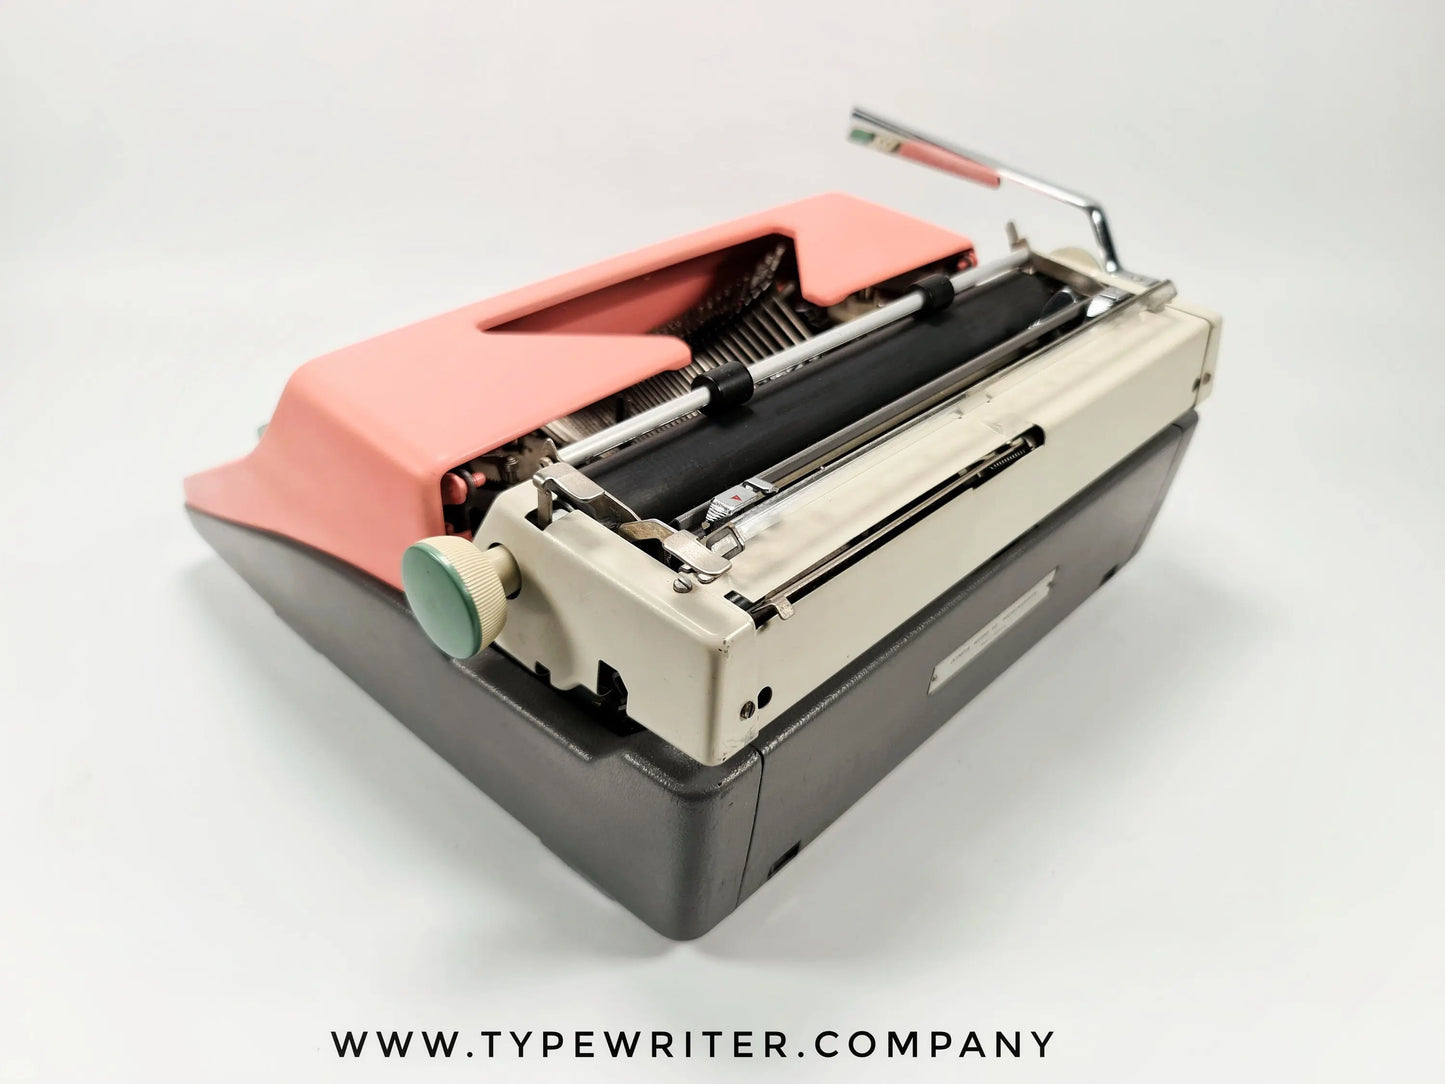 Olympia SM8/9 Pink Typewriter, Vintage, Mint Condition, Manual Portable, Professionally Serviced by Typewriter.Company - ElGranero Typewriter.Company